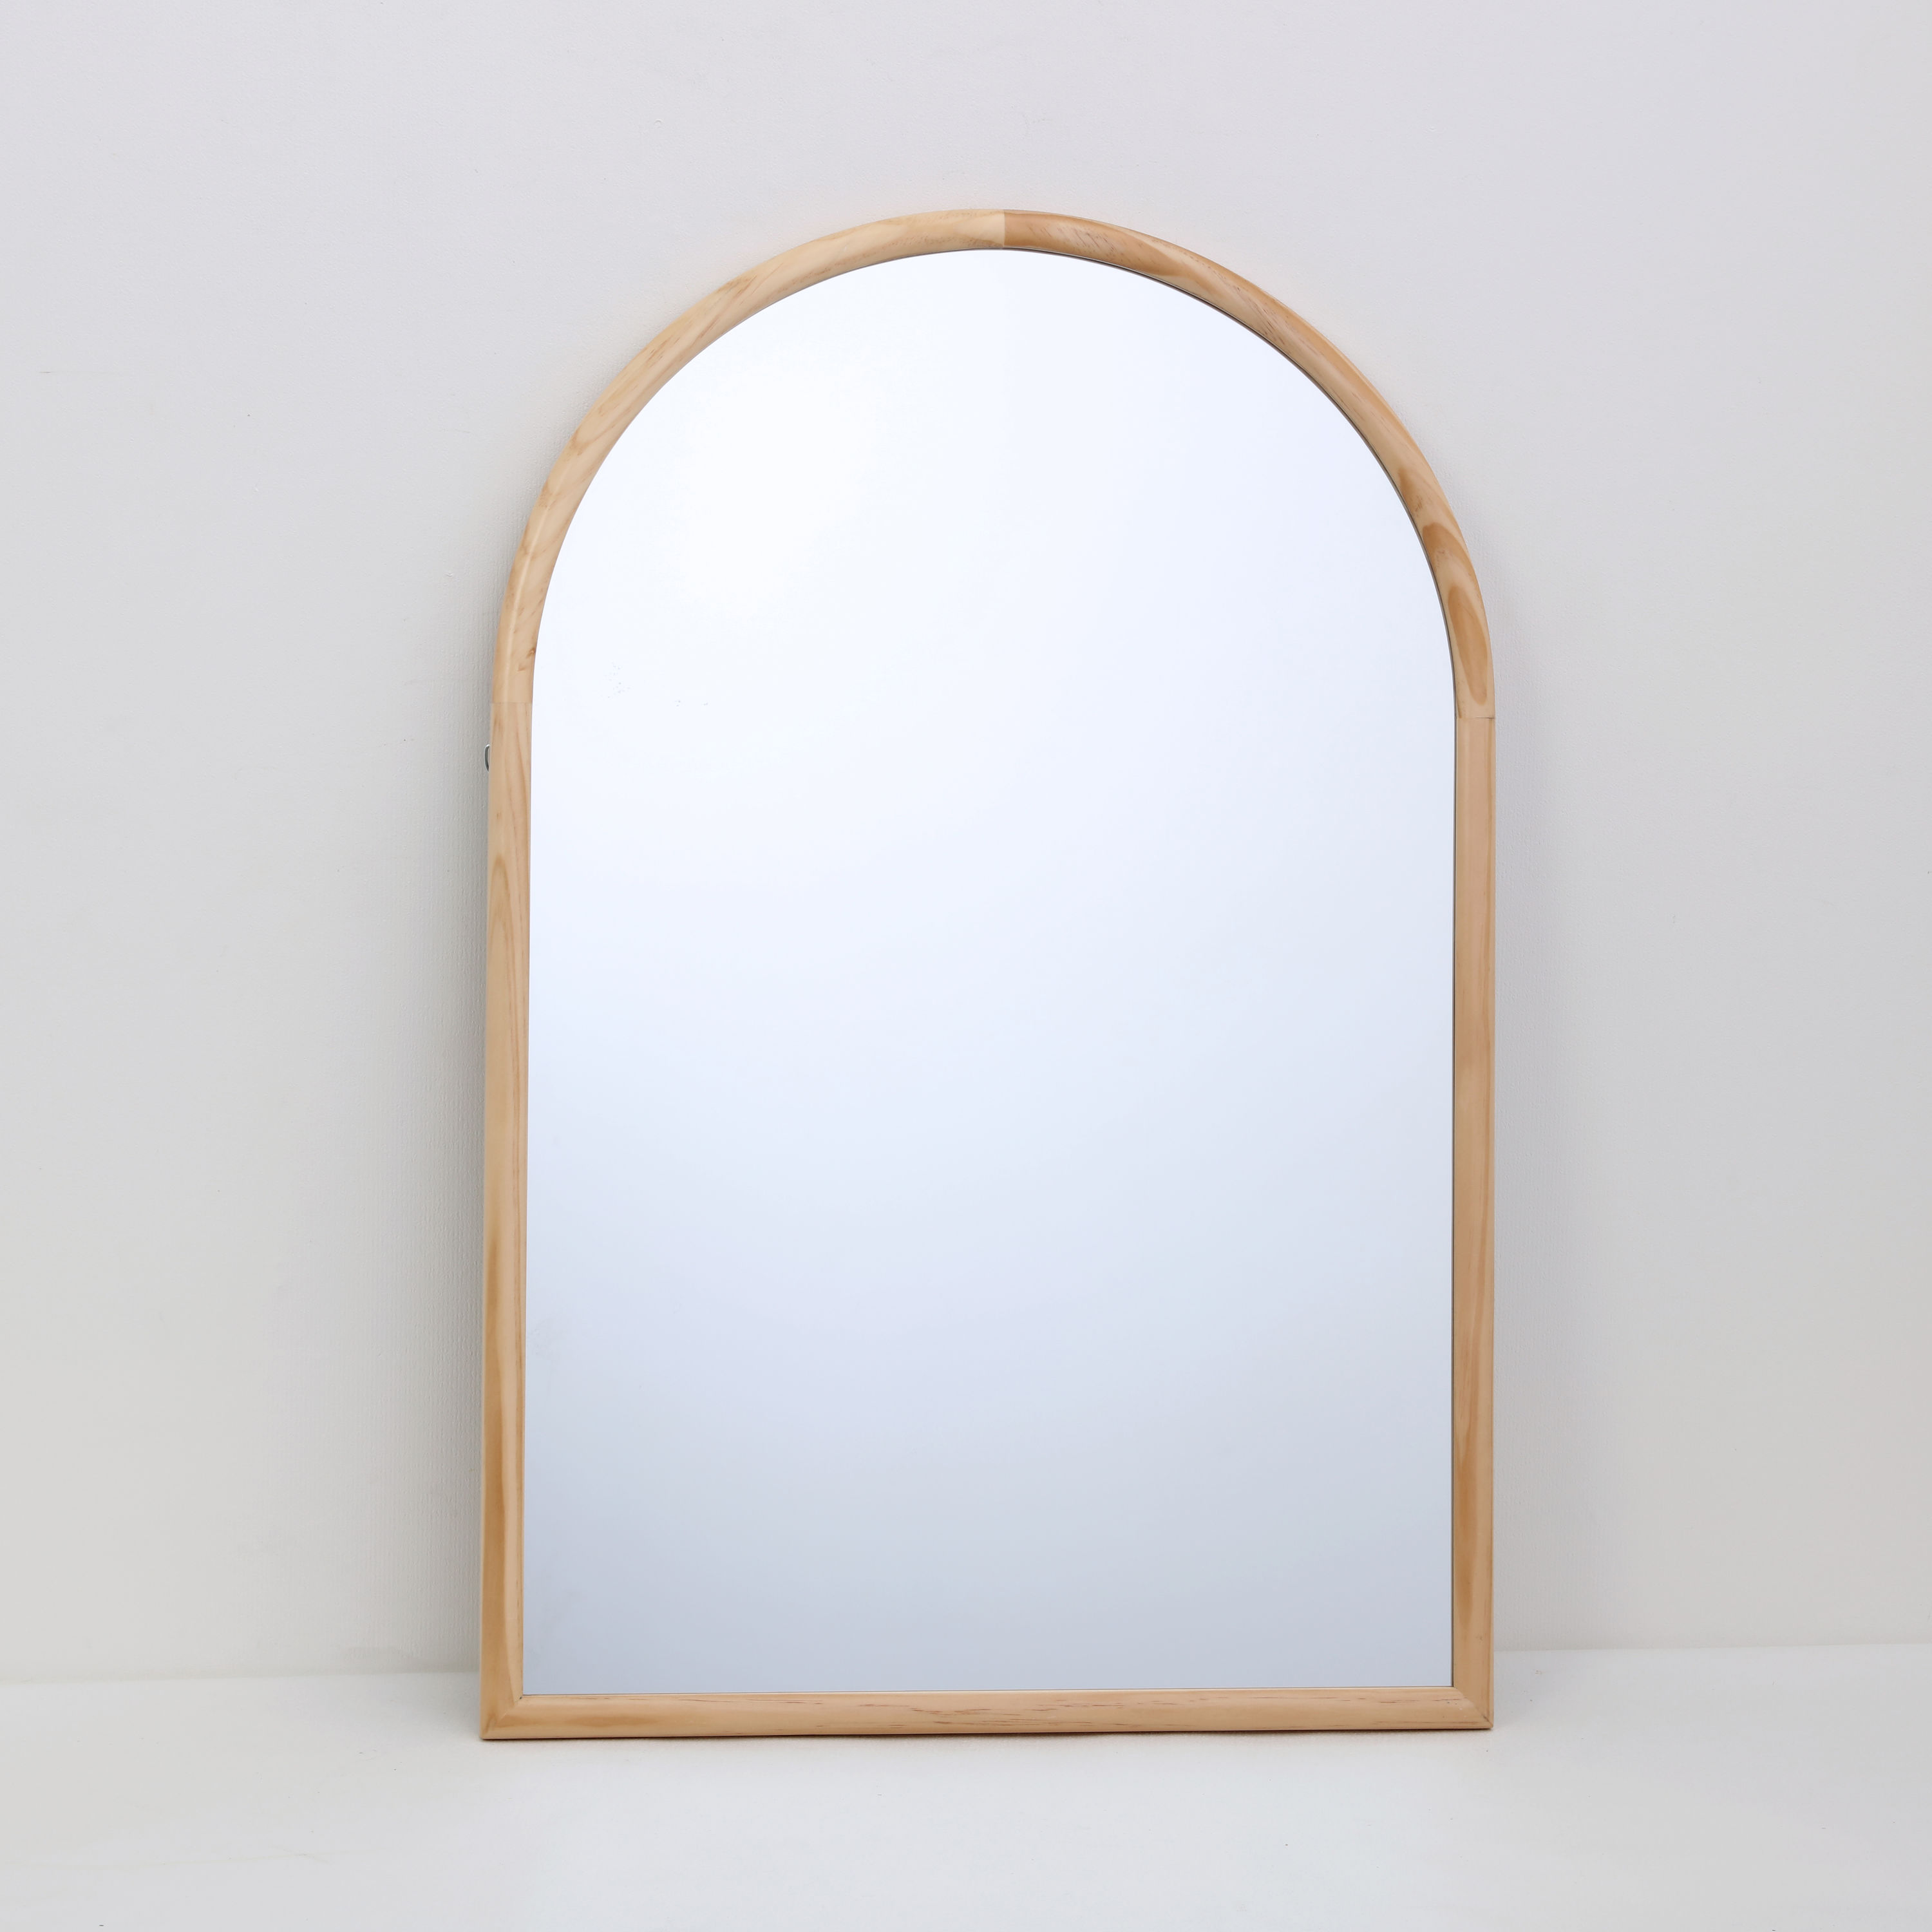 allen + roth 24-in W x 36-in H Arch Natural Framed Wall Mirror